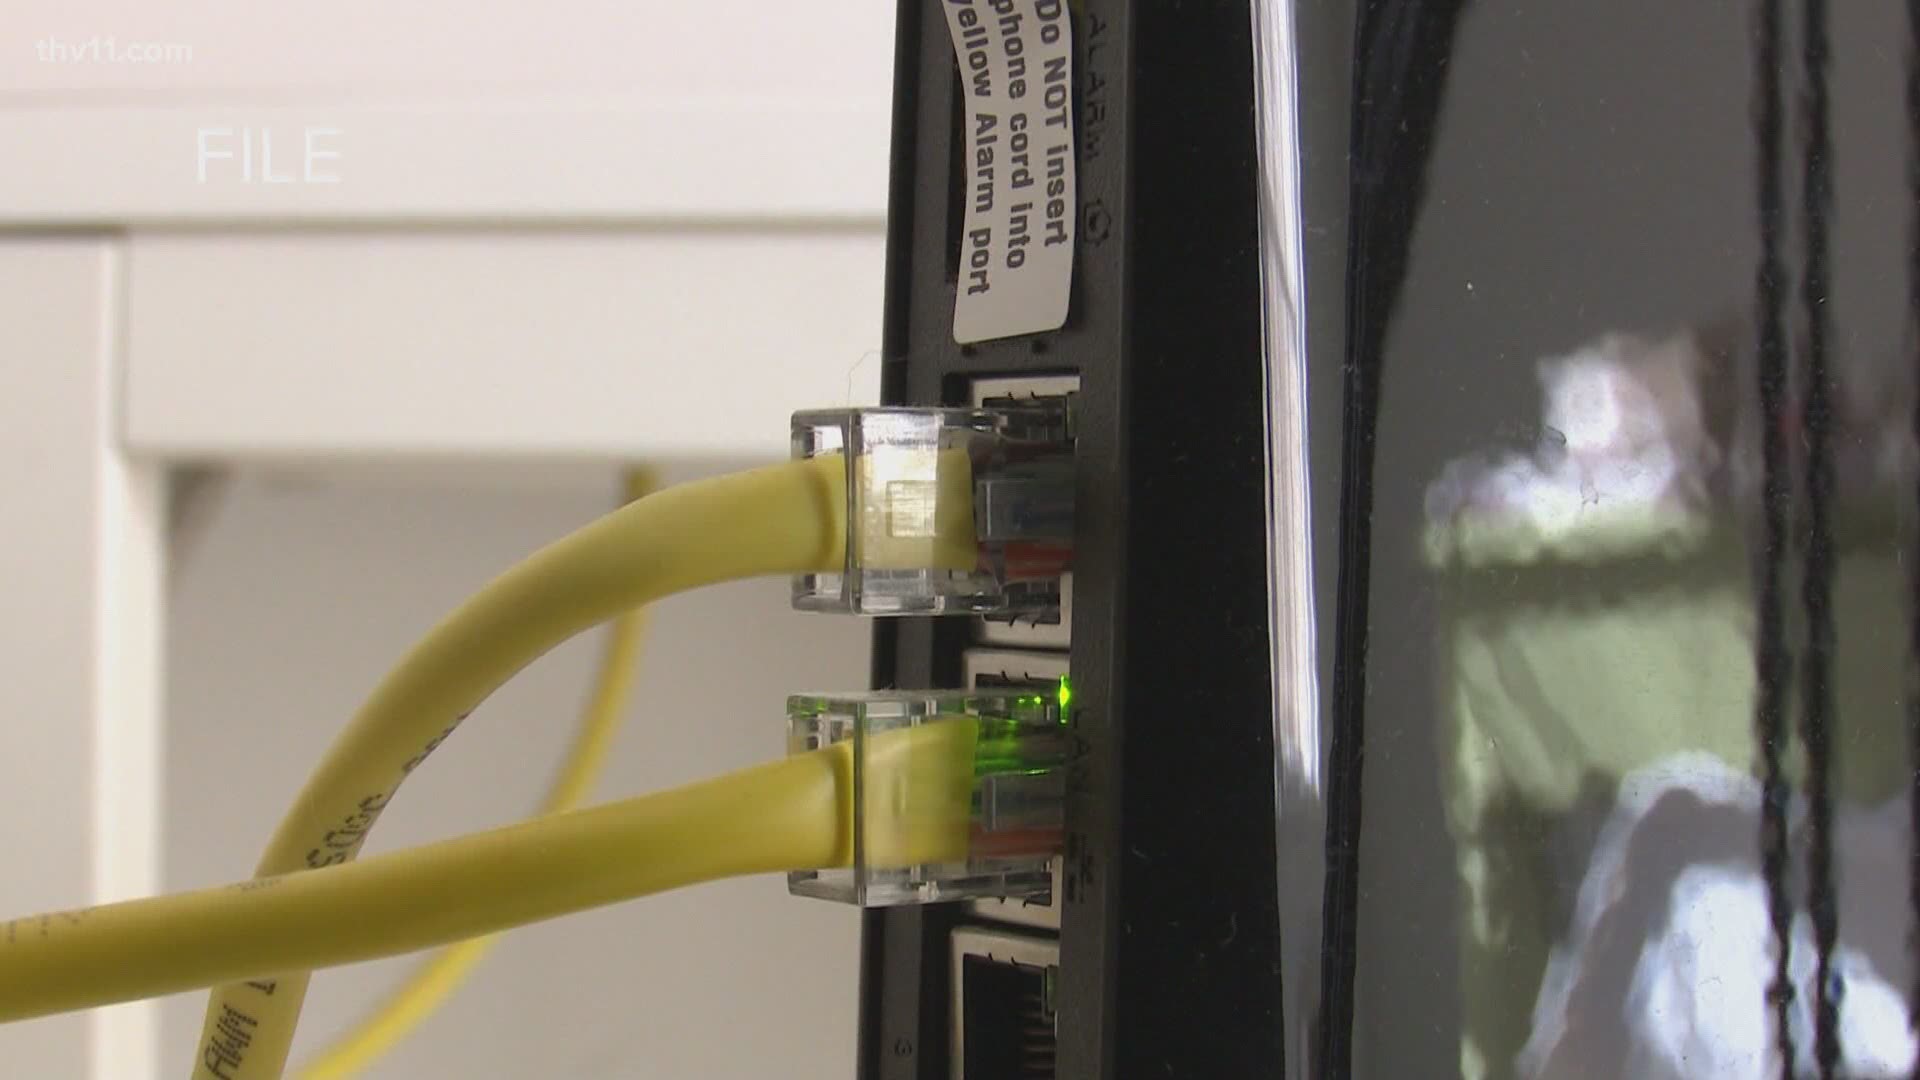 Gov. Hutchinson announced that $10 million will be used for Wi-Fi access points across Arkansas for students.